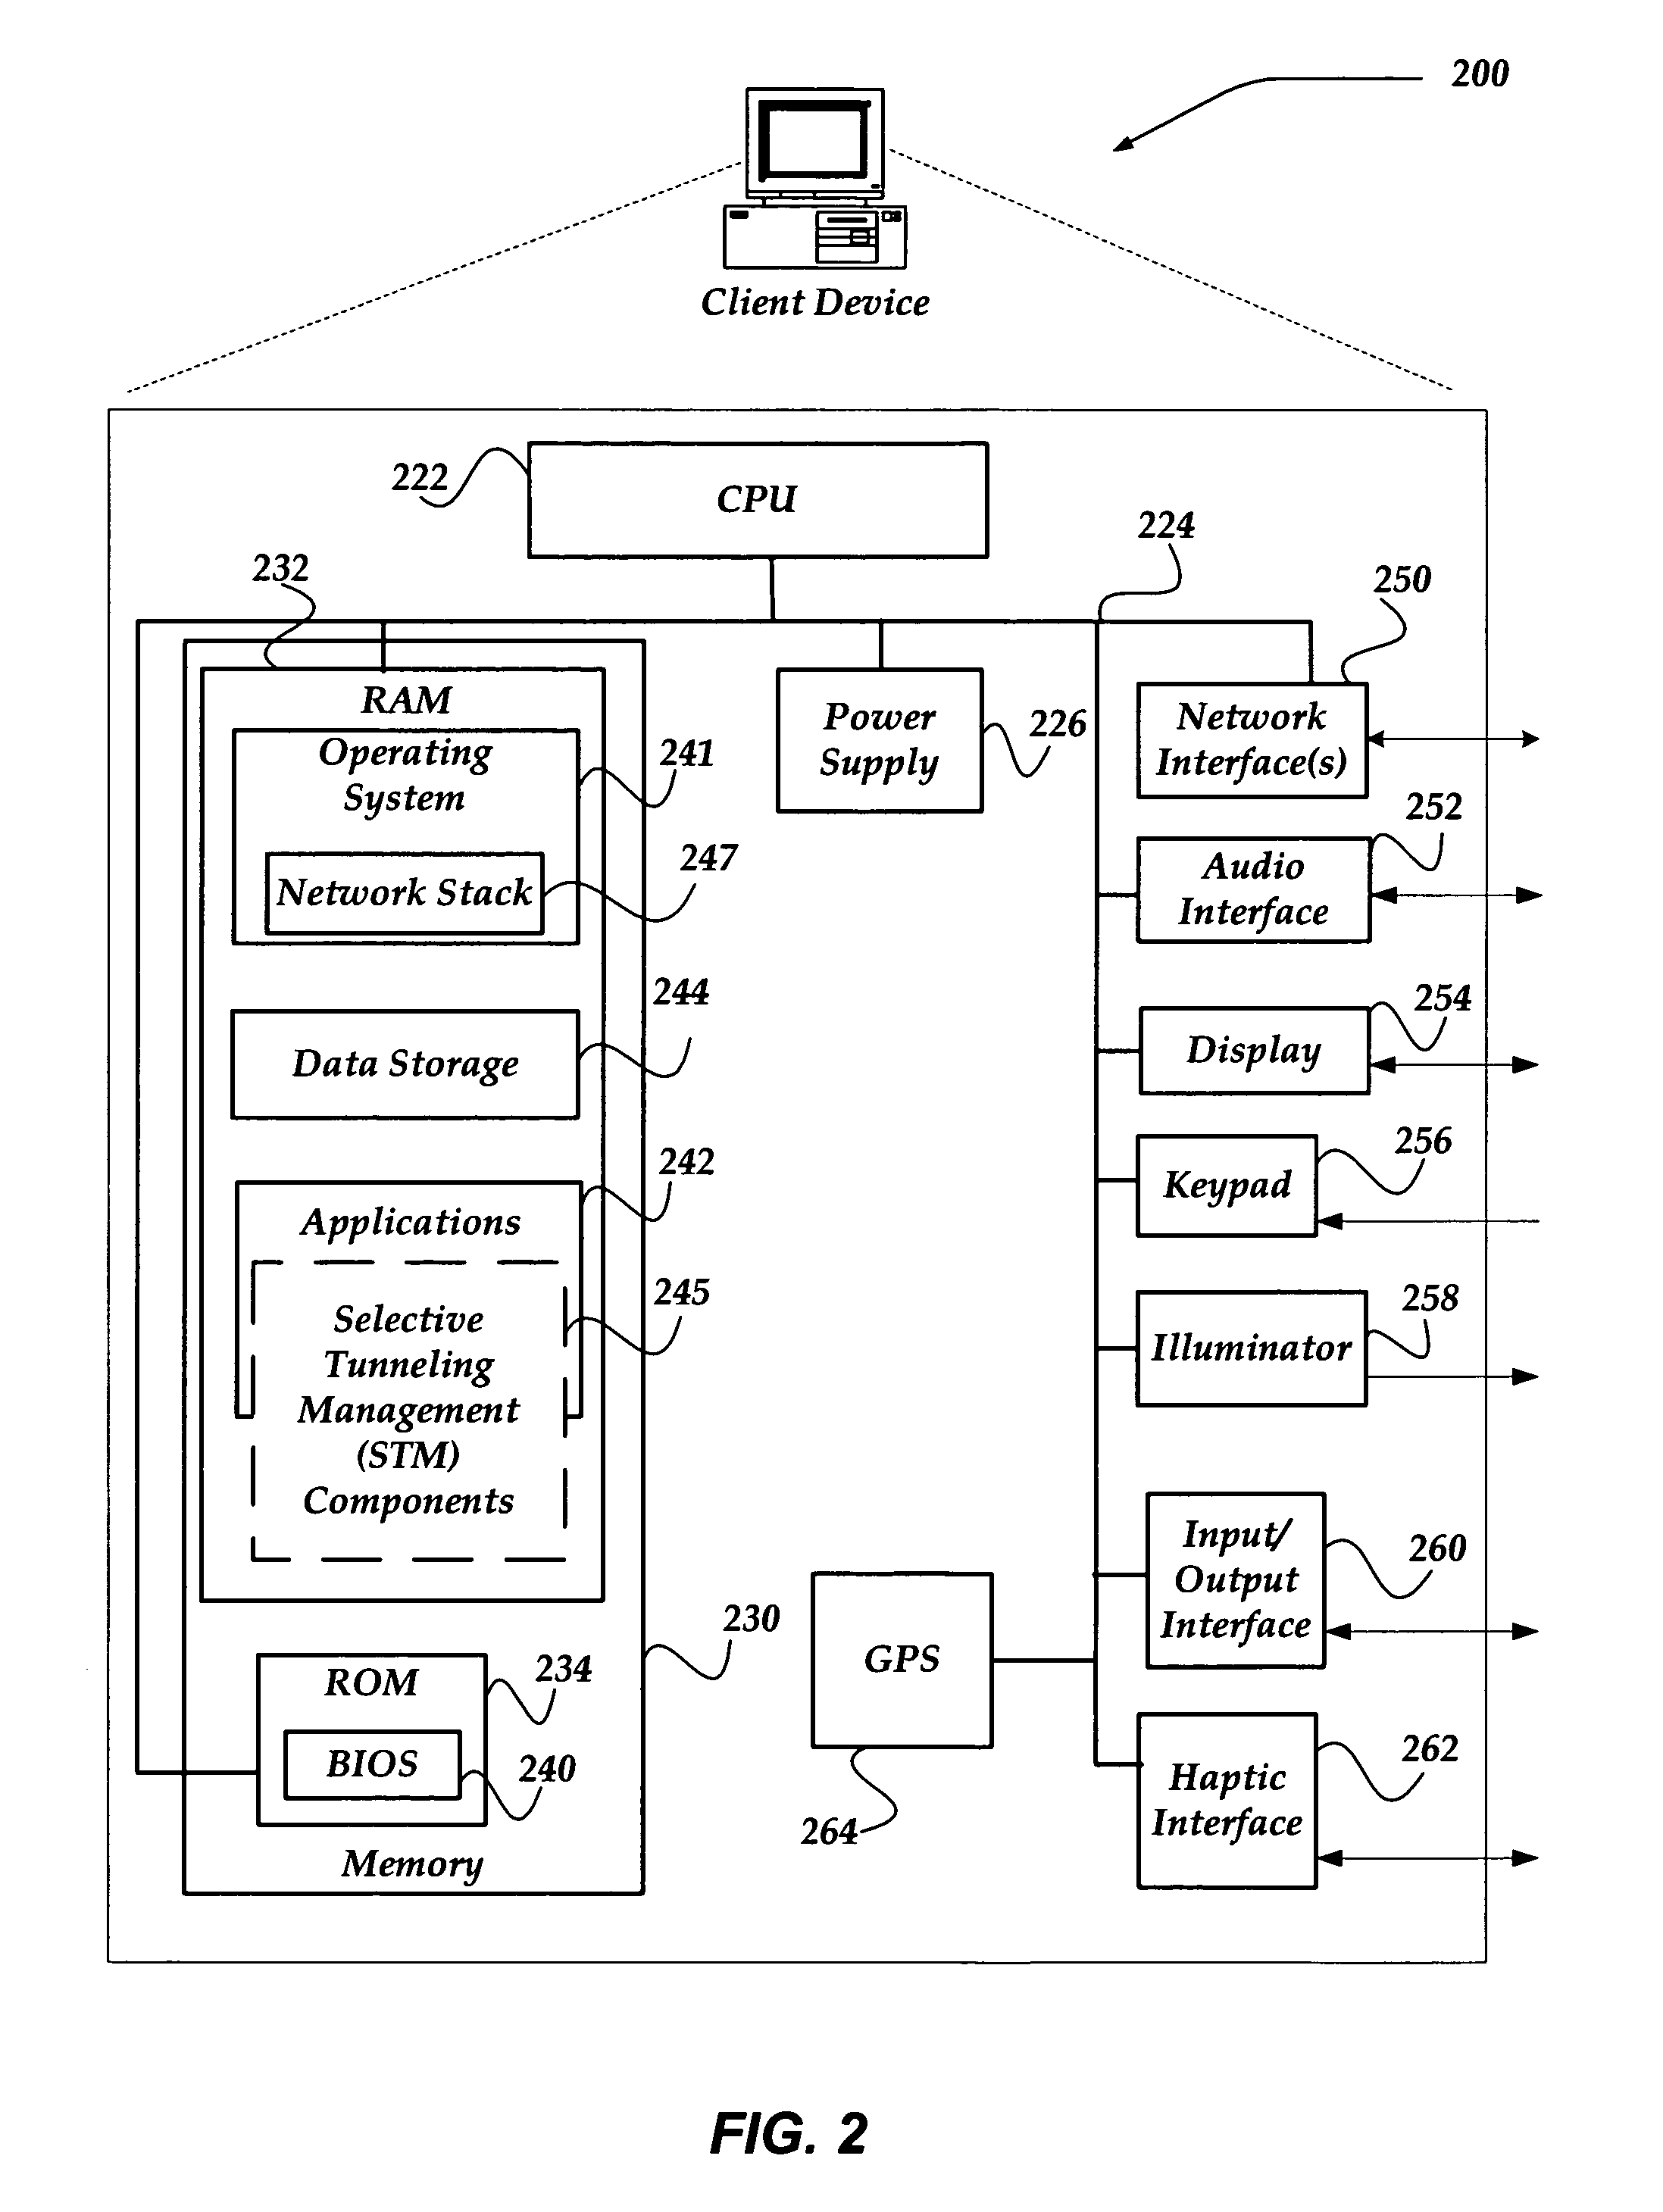 Selective tunneling based on a client configuration and request